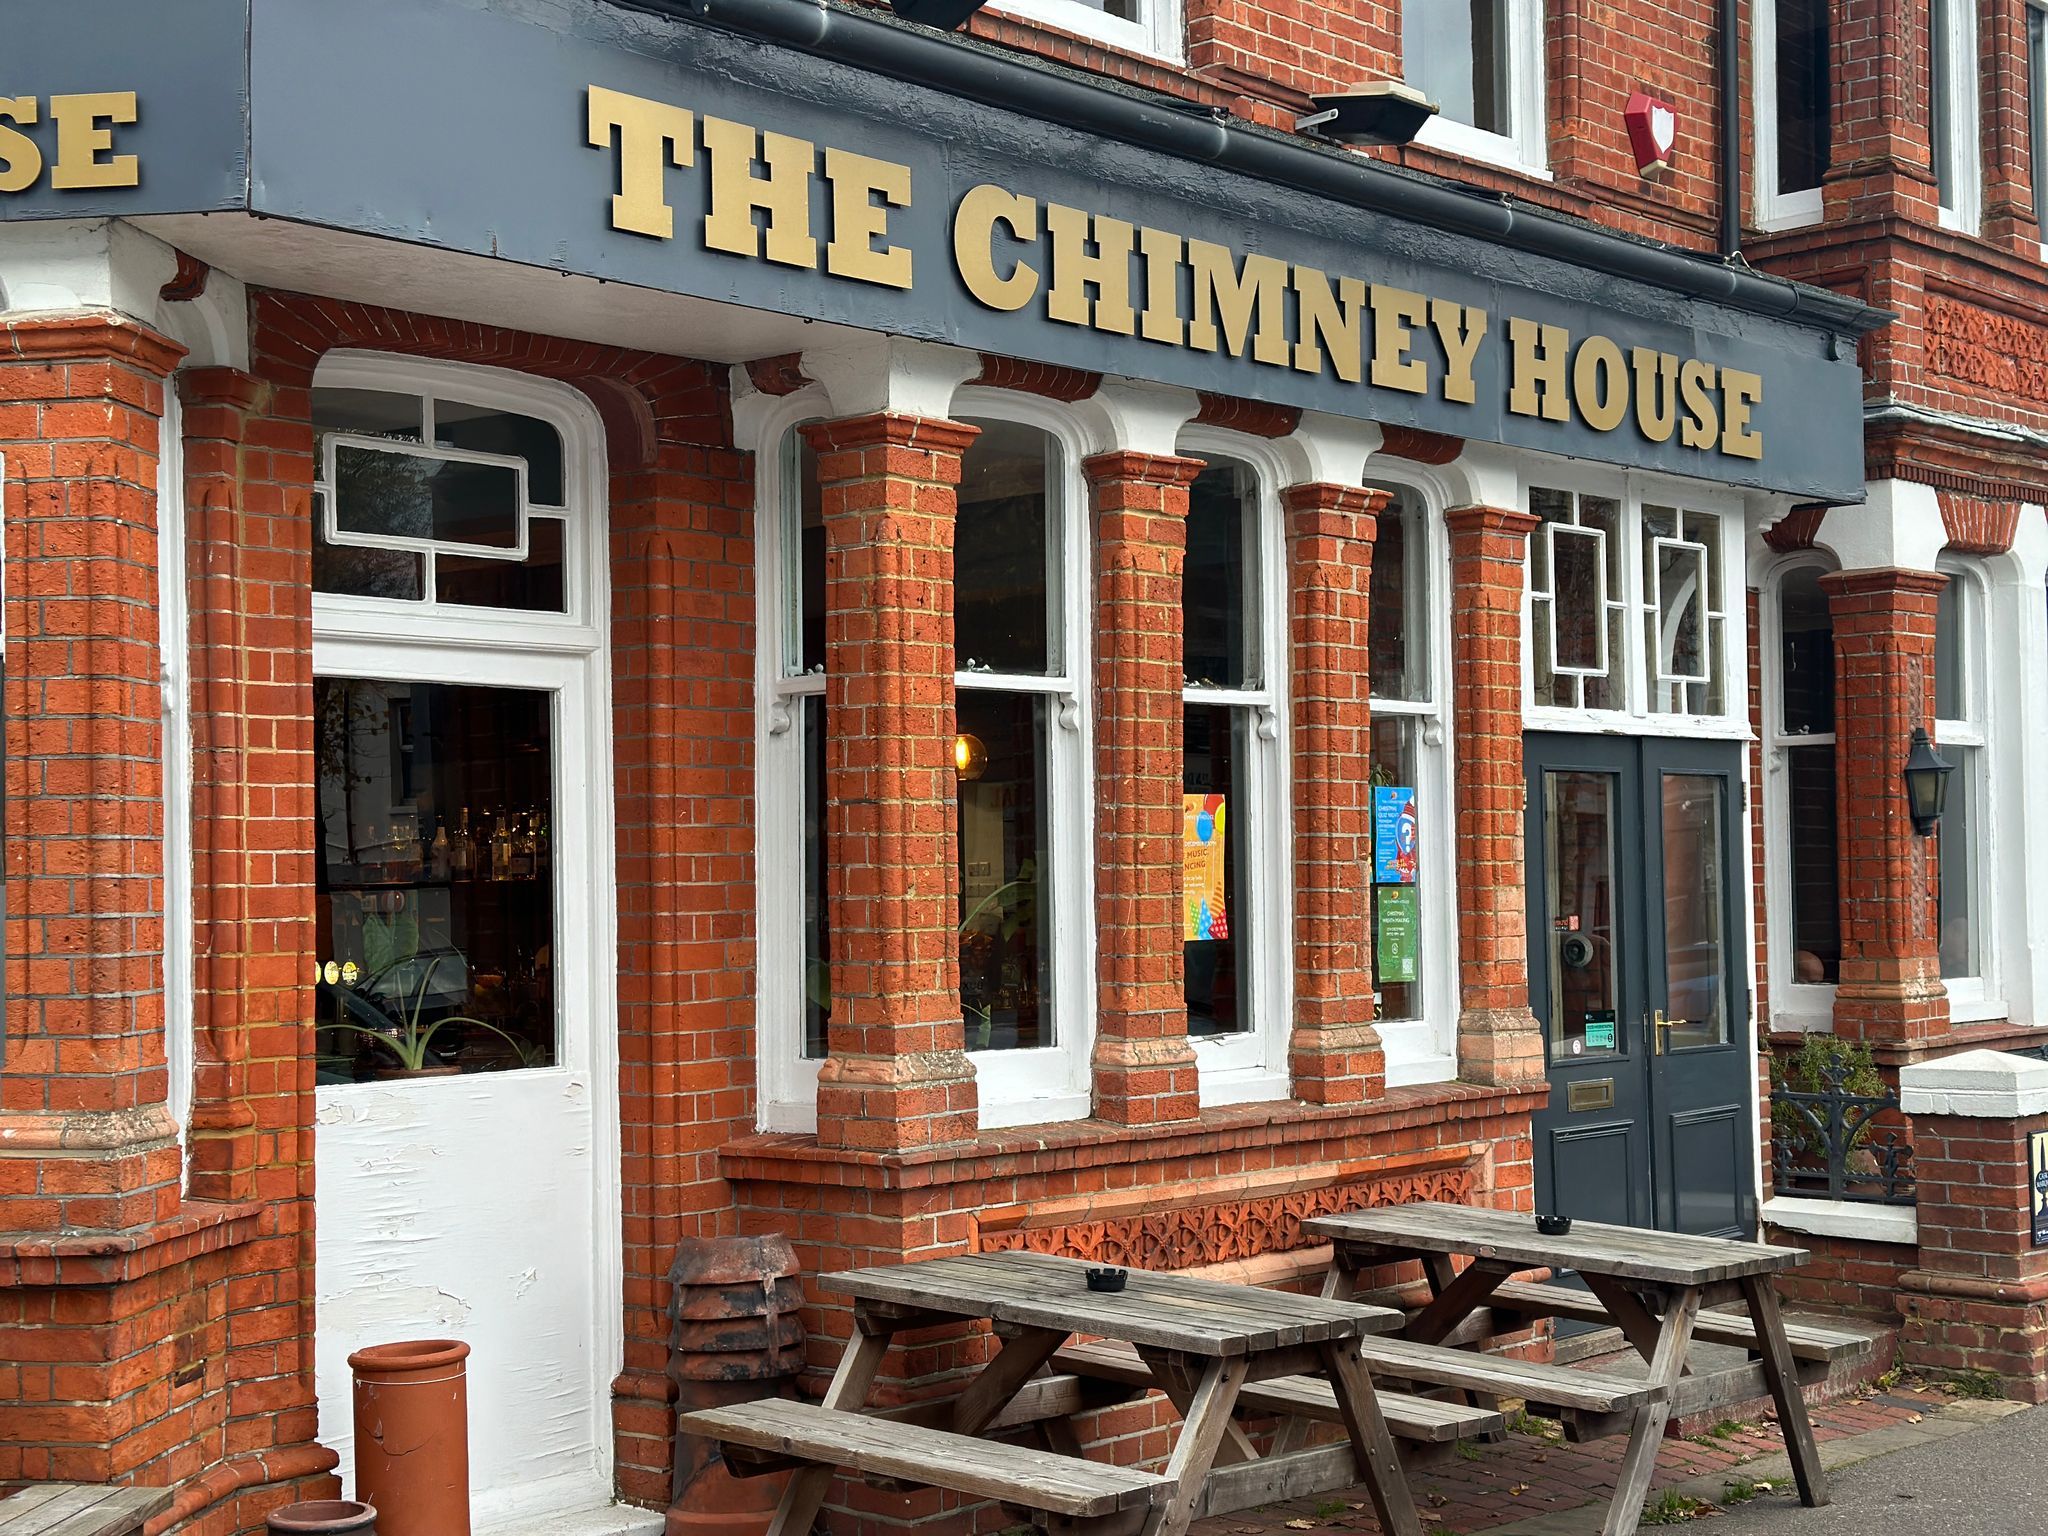 exterior shot of the brown brick building with gray sign with gold letters saying The Chimney House